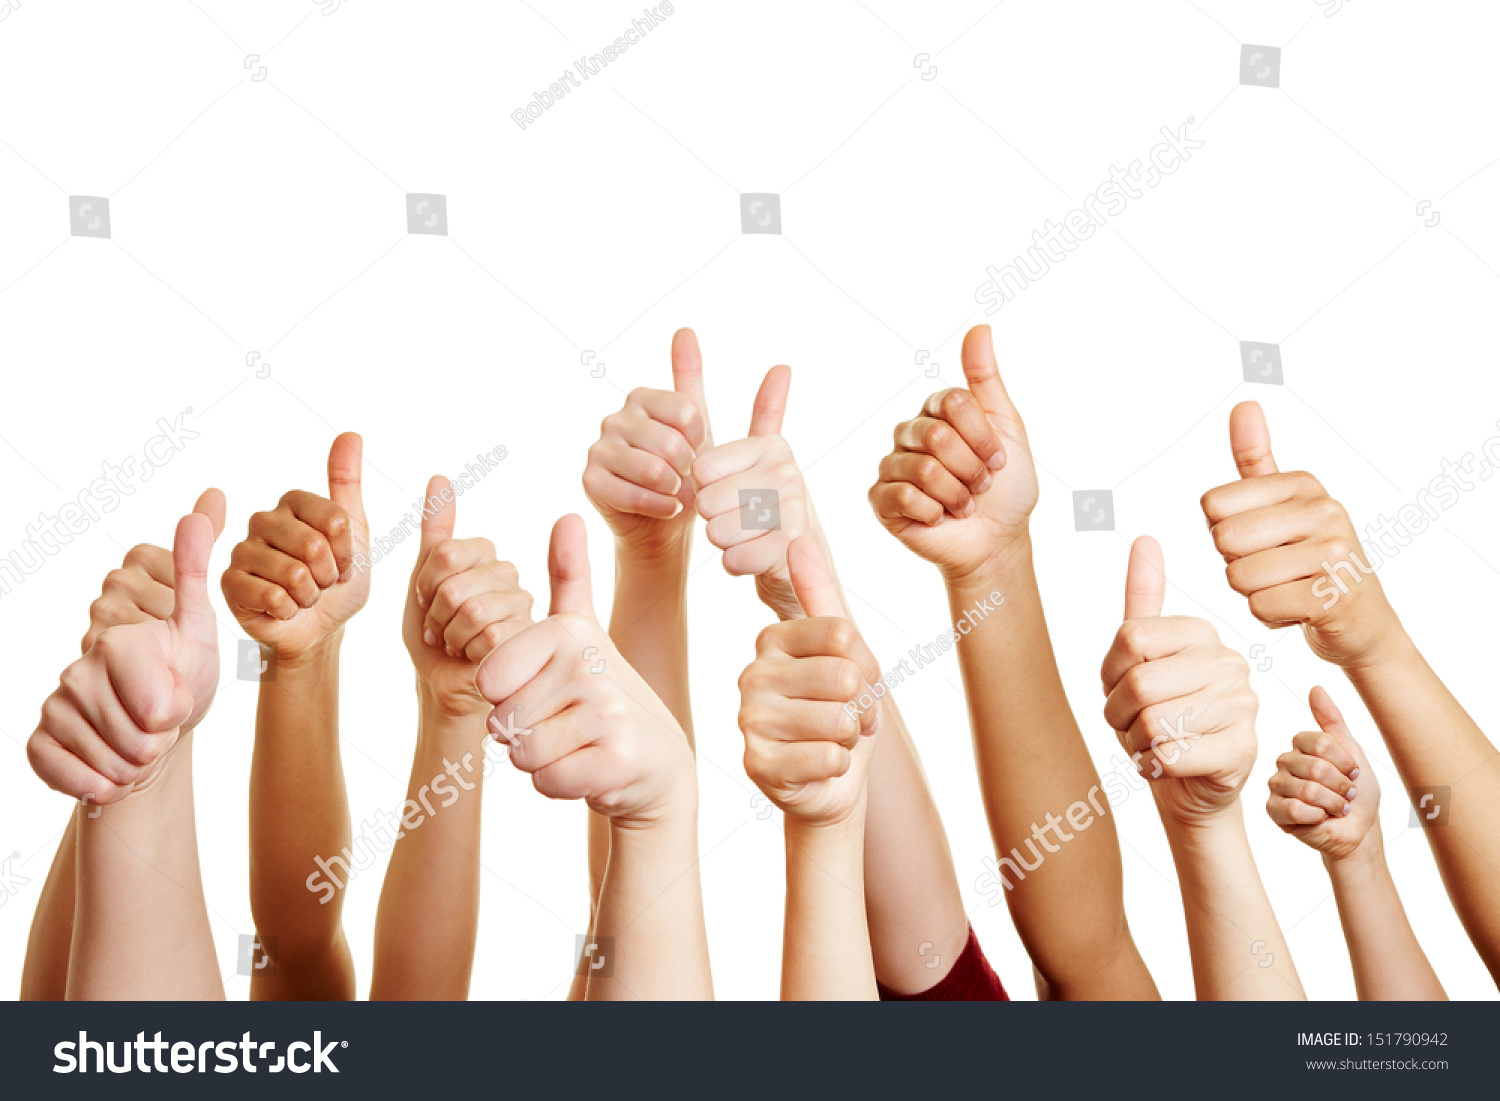 Many people congratulate a winner and holding their thumbs up #151790942